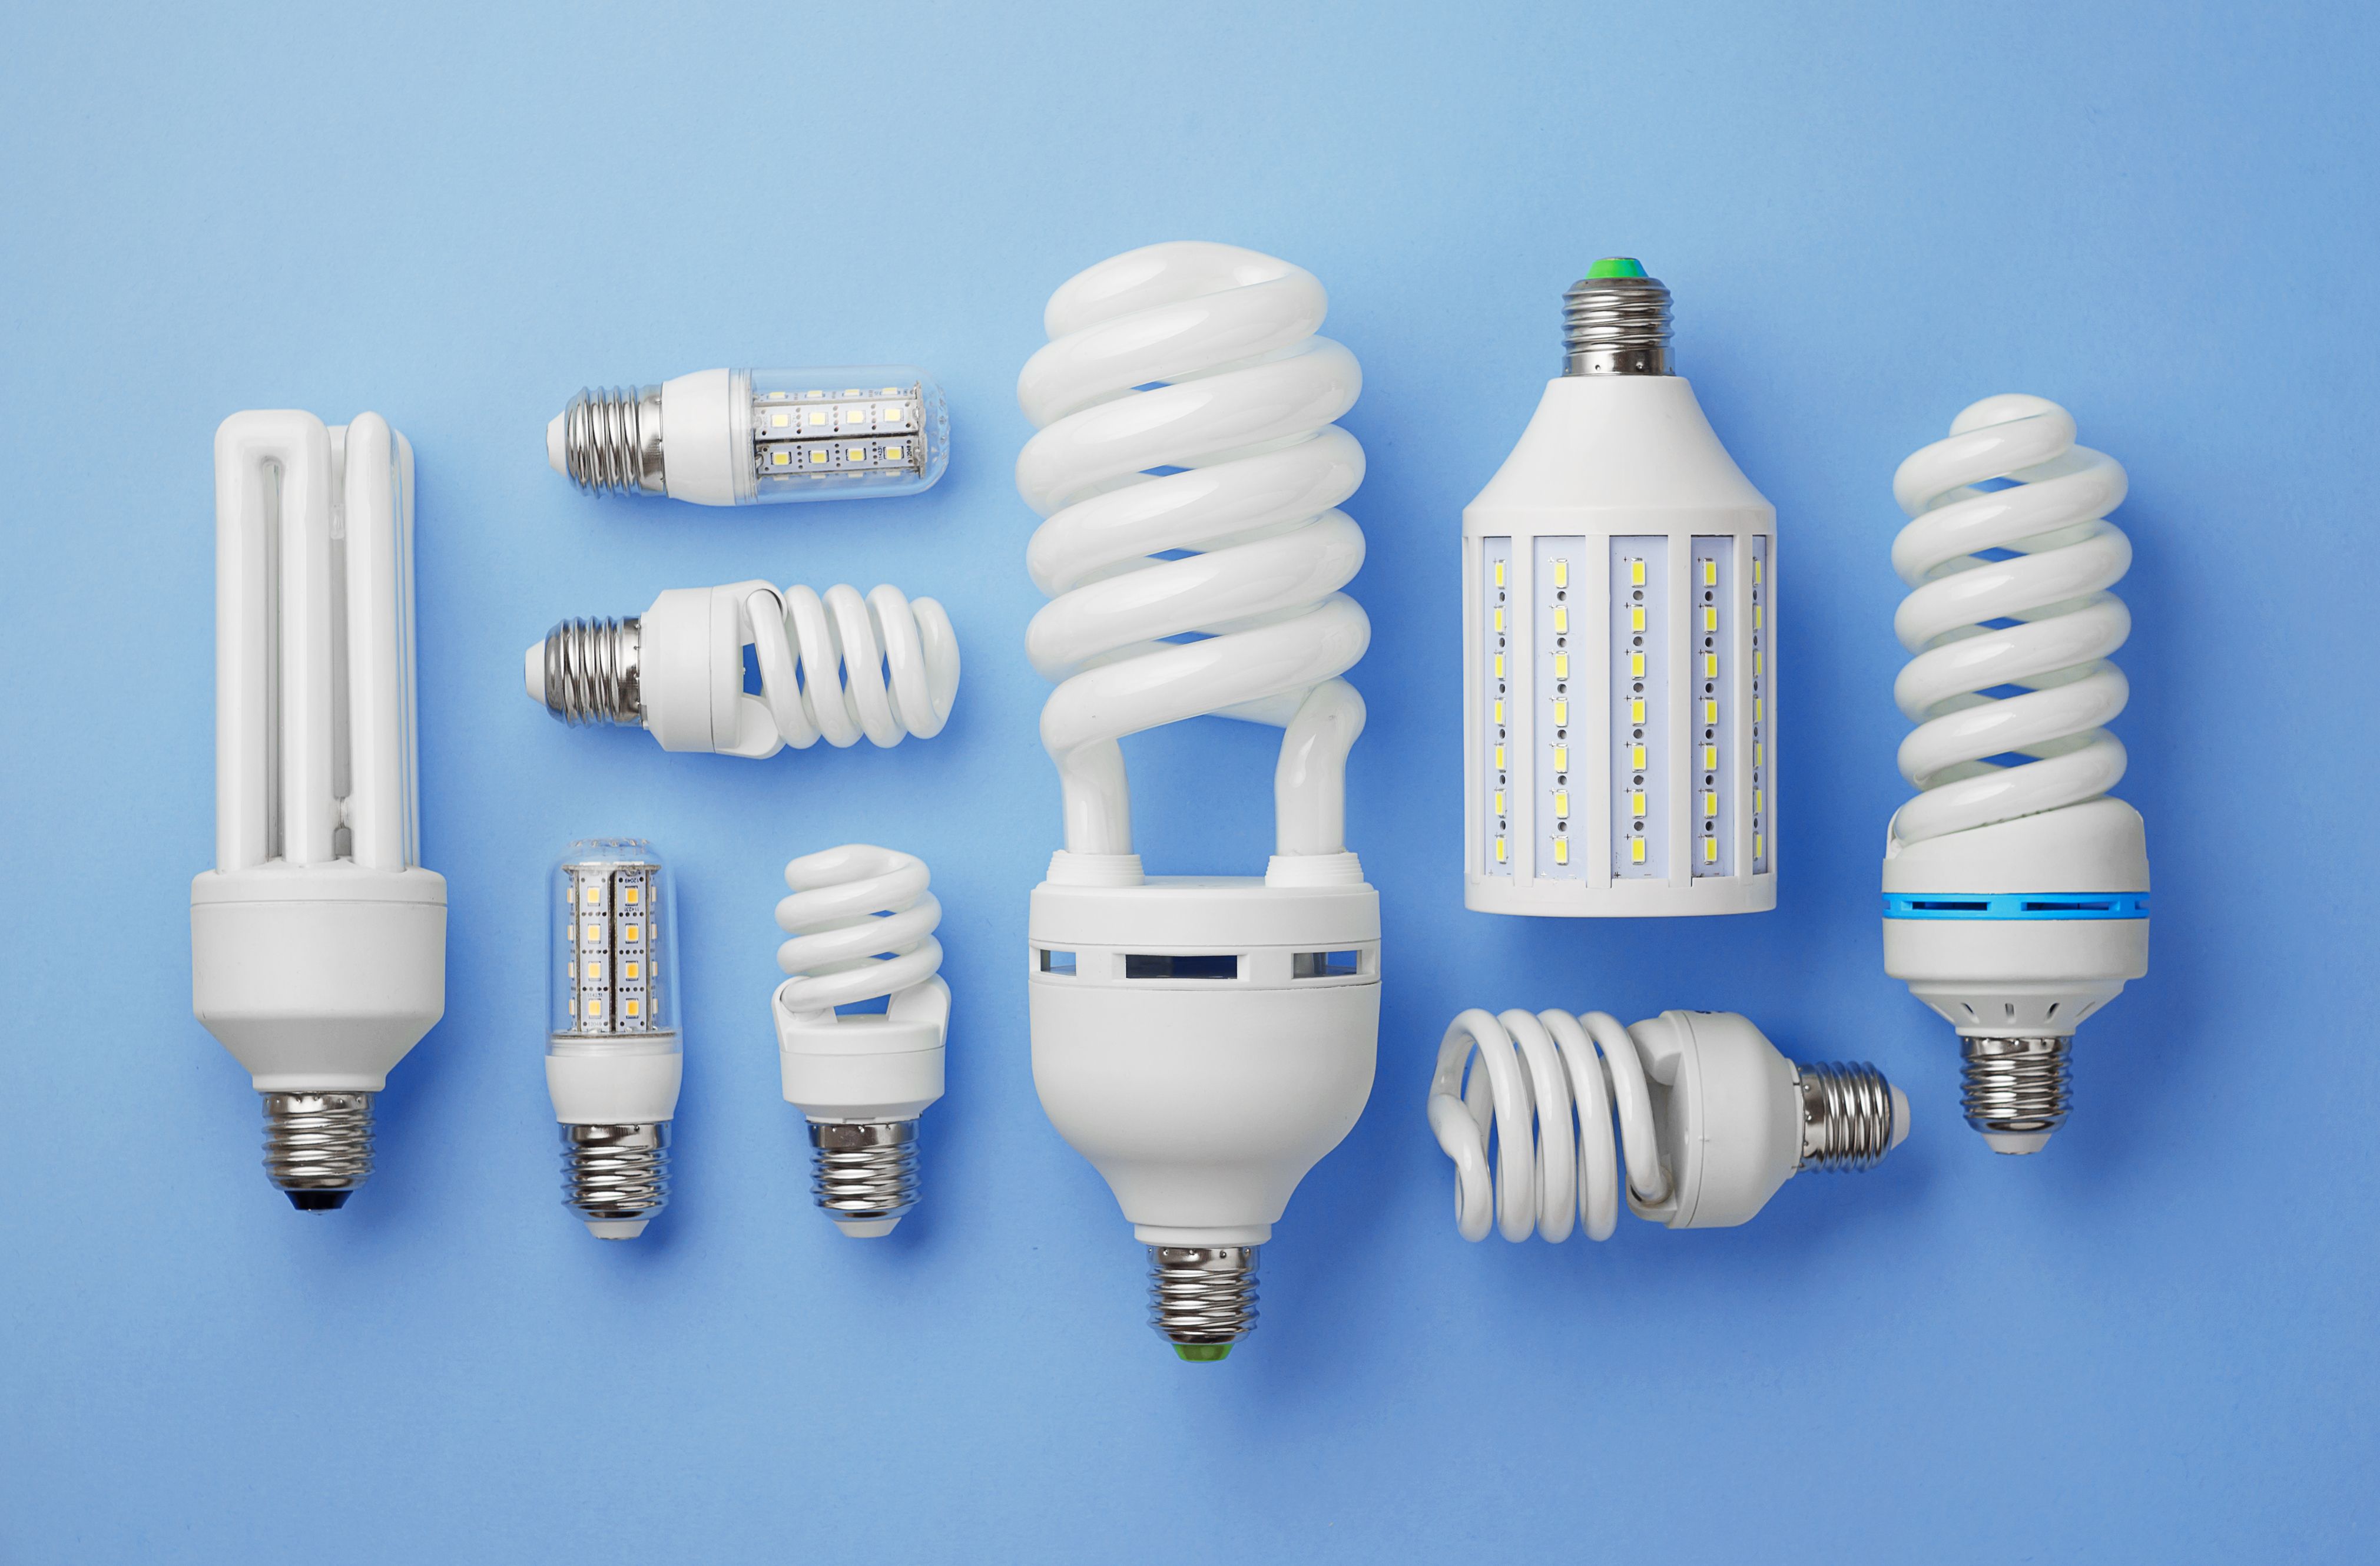 Smart light bulbs could give away your password secrets – Sophos News